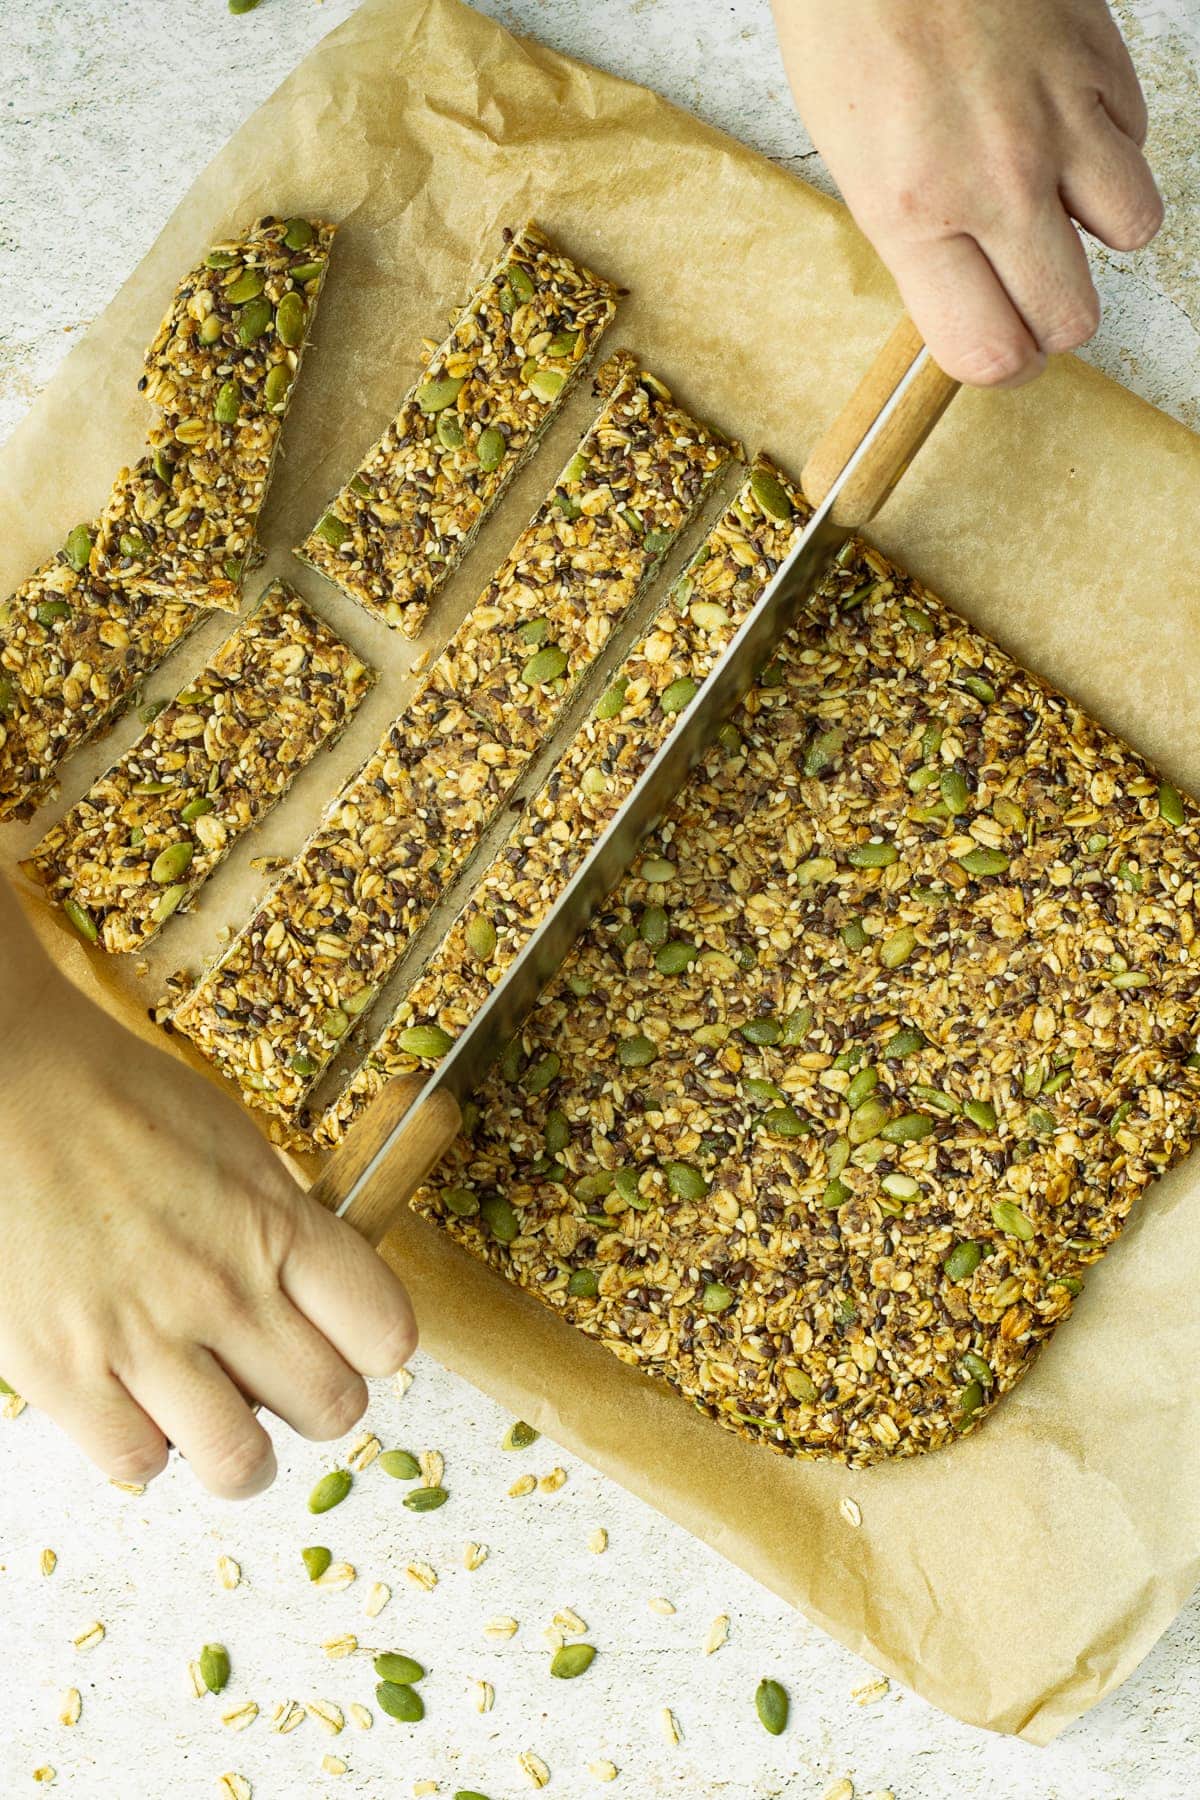 Hands cutting granola bars with a large cutter